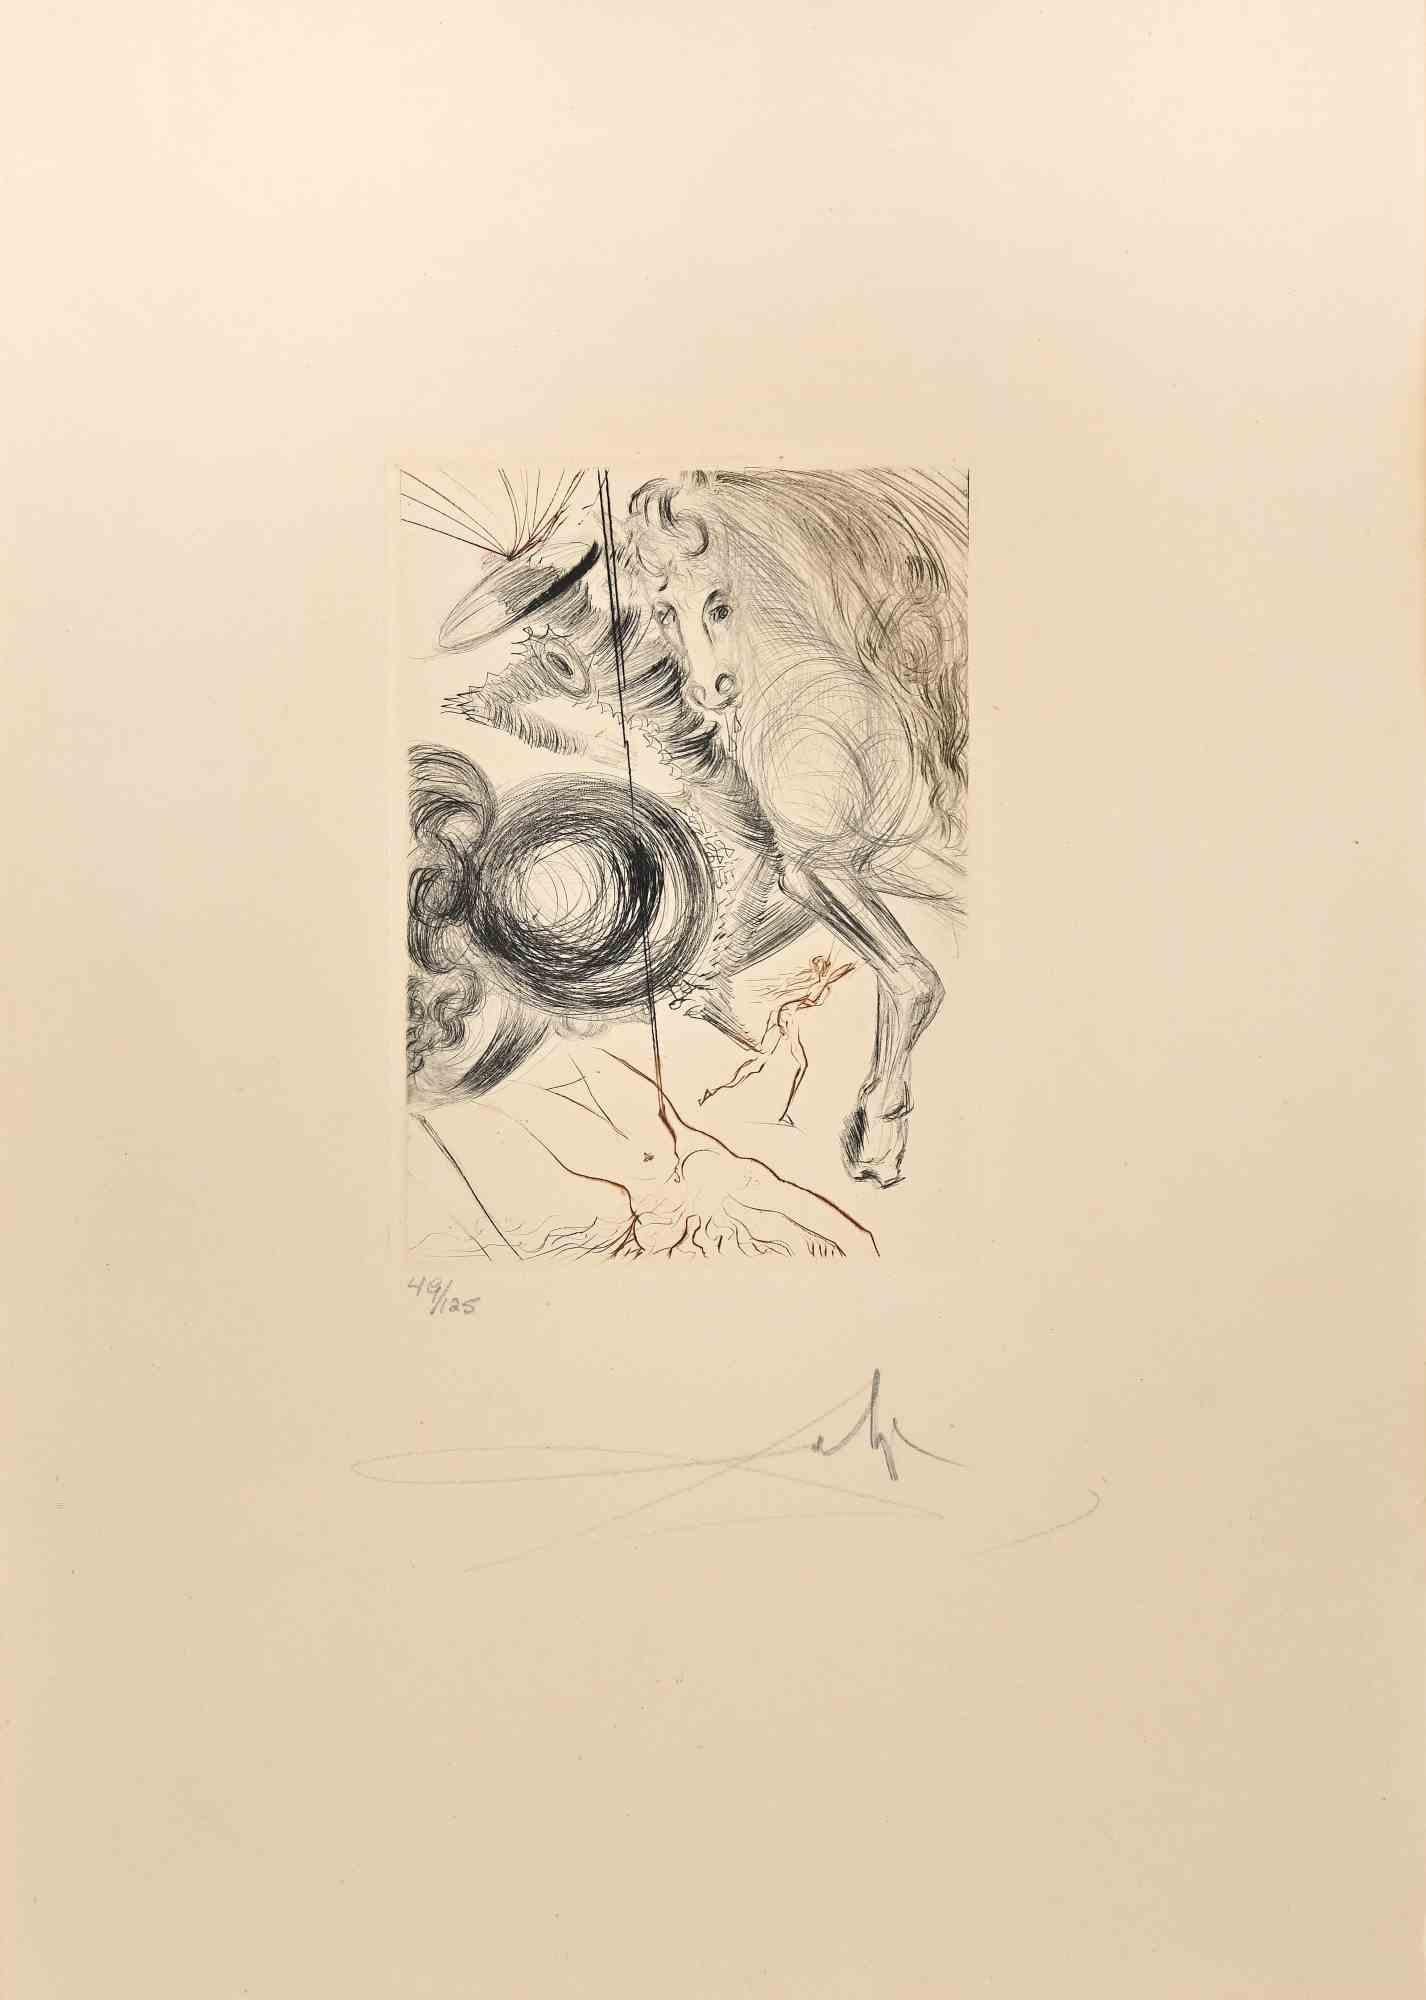 Salvador Dalí Print - The Hell of Cruel Beauties - Etching and Drypoint - 1972